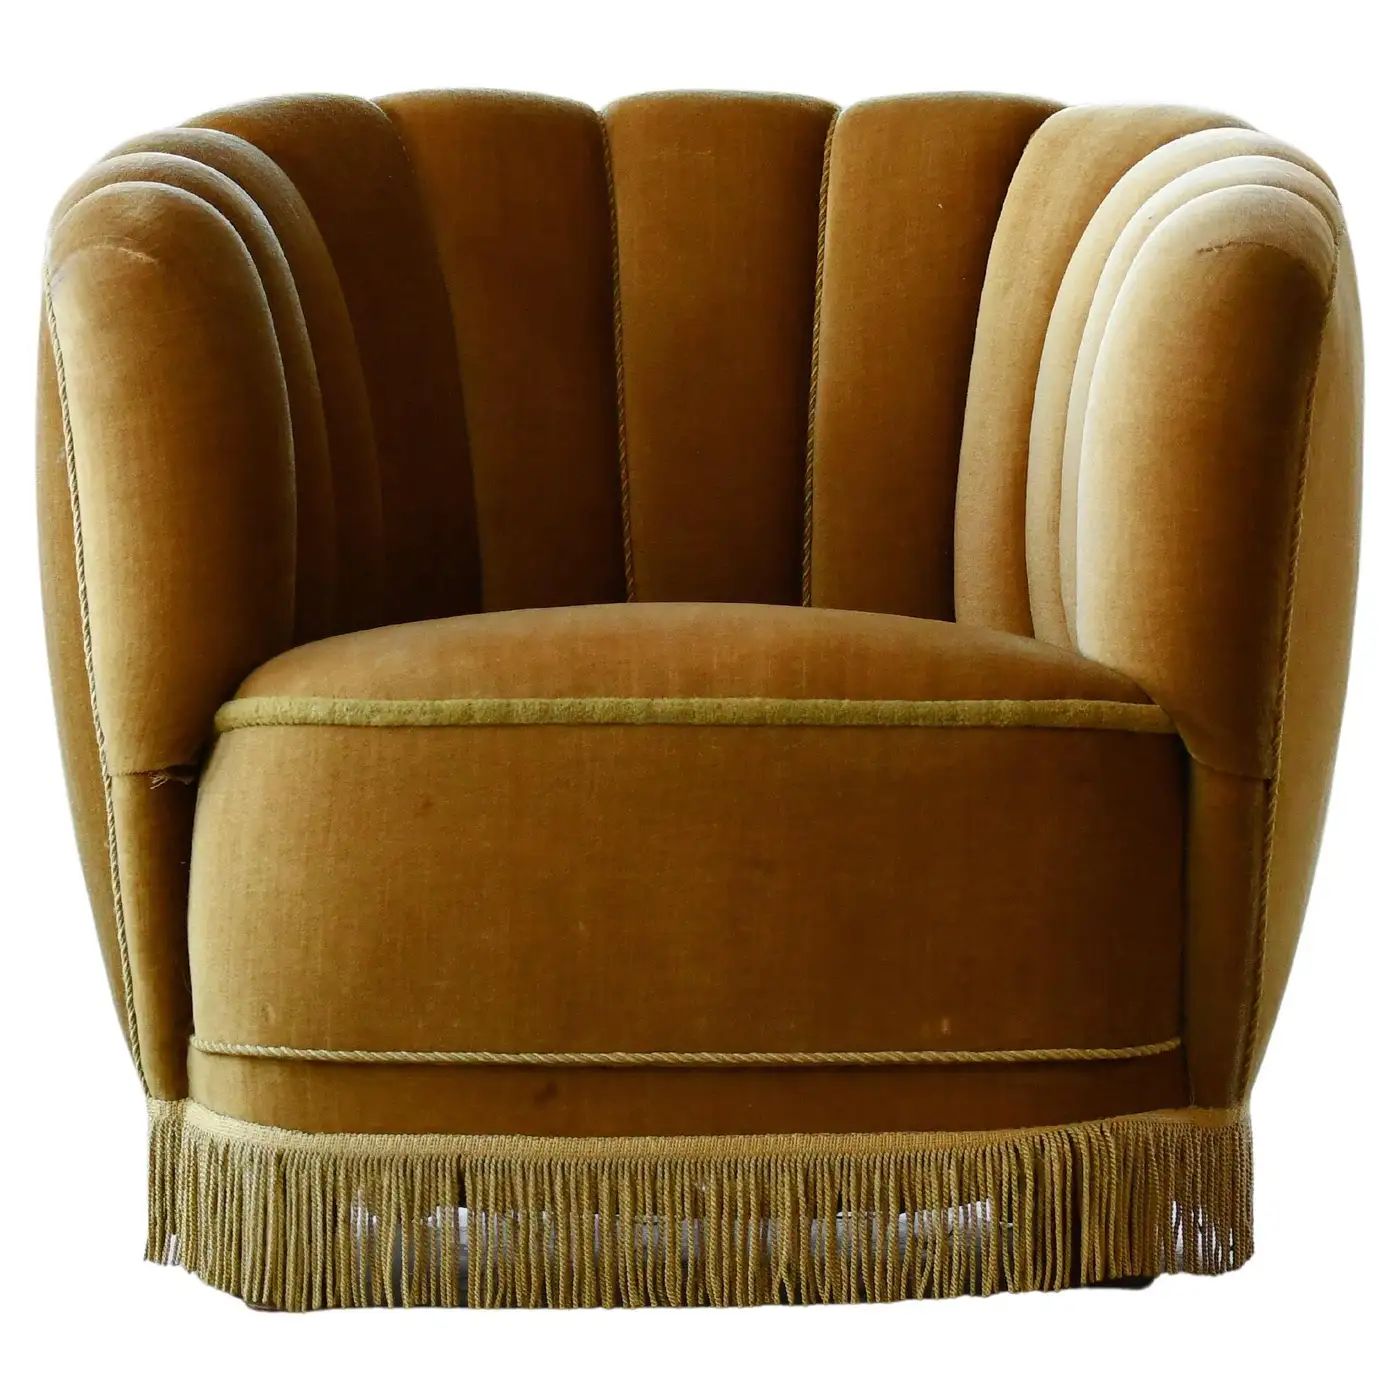 Danish 1940s Barrel Style Club or Lounge Chair in the Manner of Viggo Boesen | 1stDibs